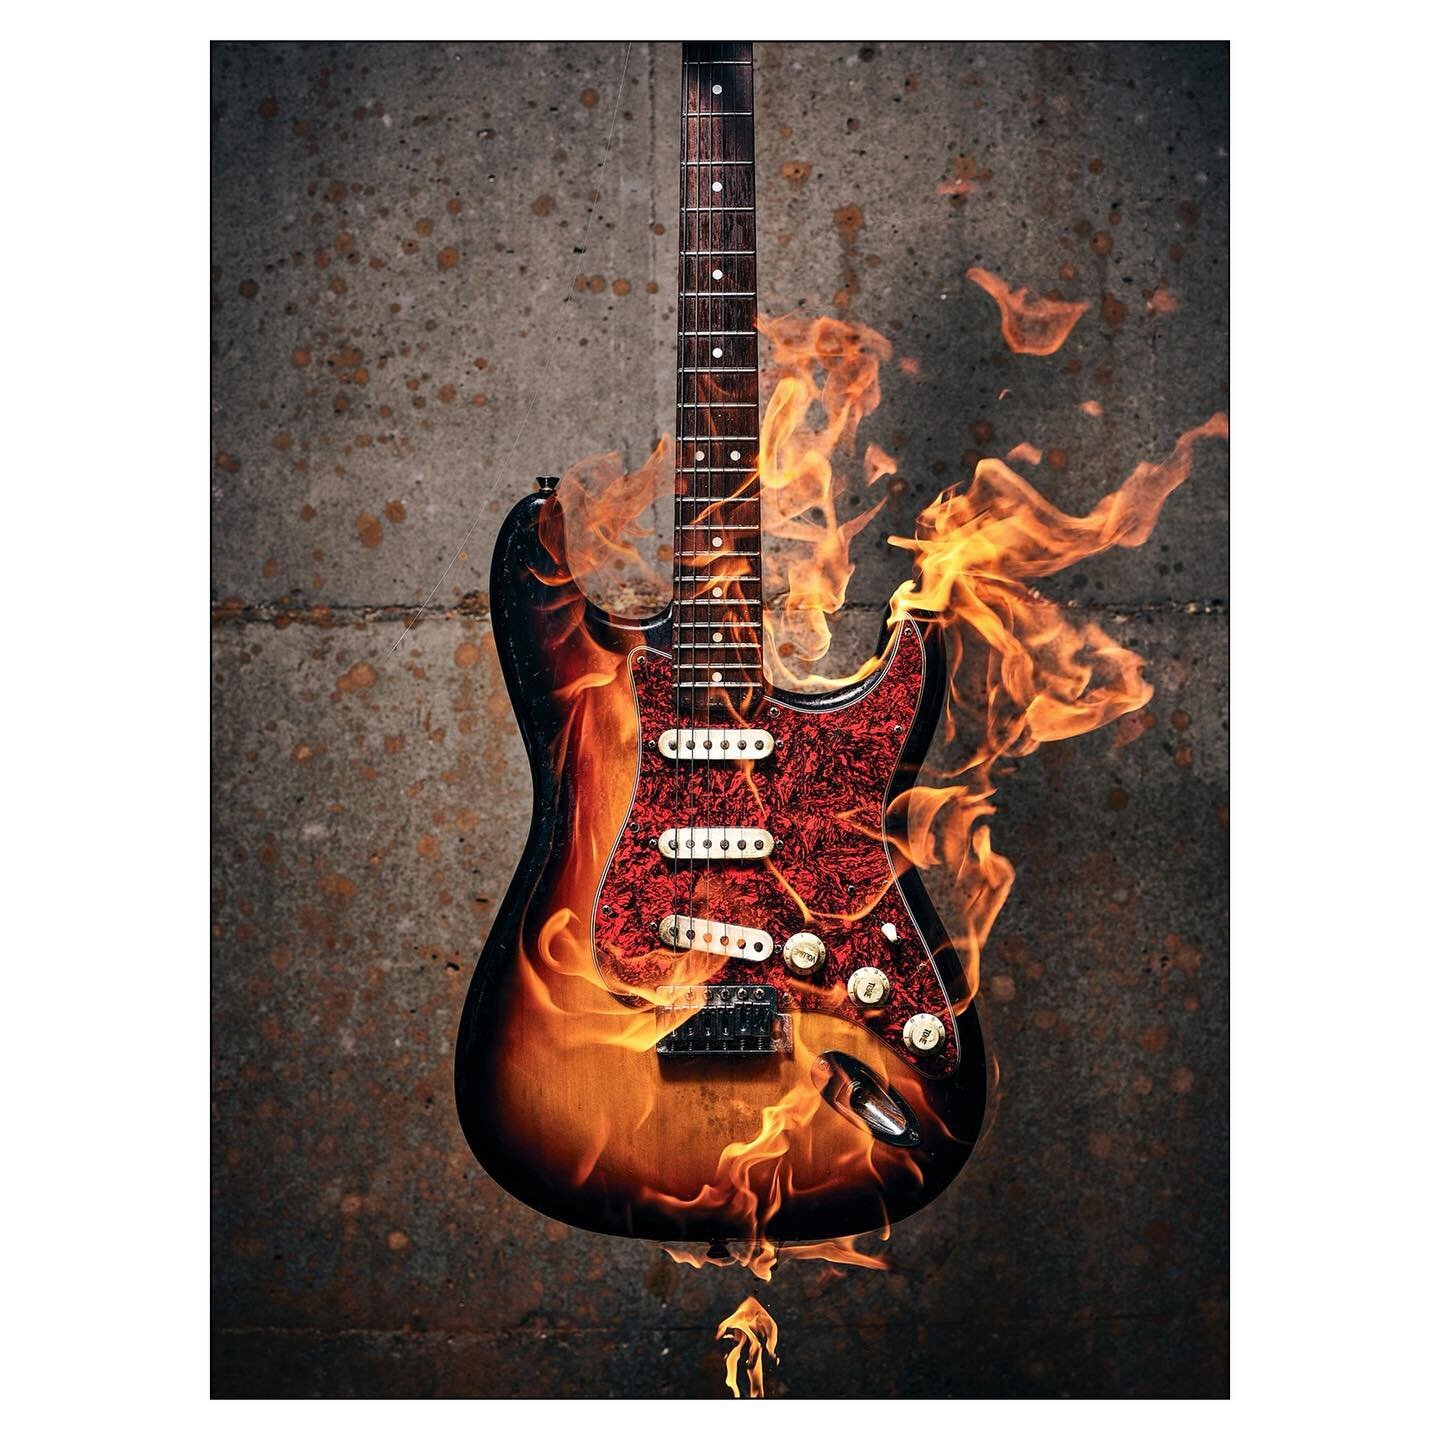 Well this was a fun picture to make!
While collaborating with @sleepydownsouth on our @jasonisbell cover shoot for @gardenandgun, I mentioned setting a guitar on fire (because any shoot that I get to set something on fire is a good shoot). 
It didn&r